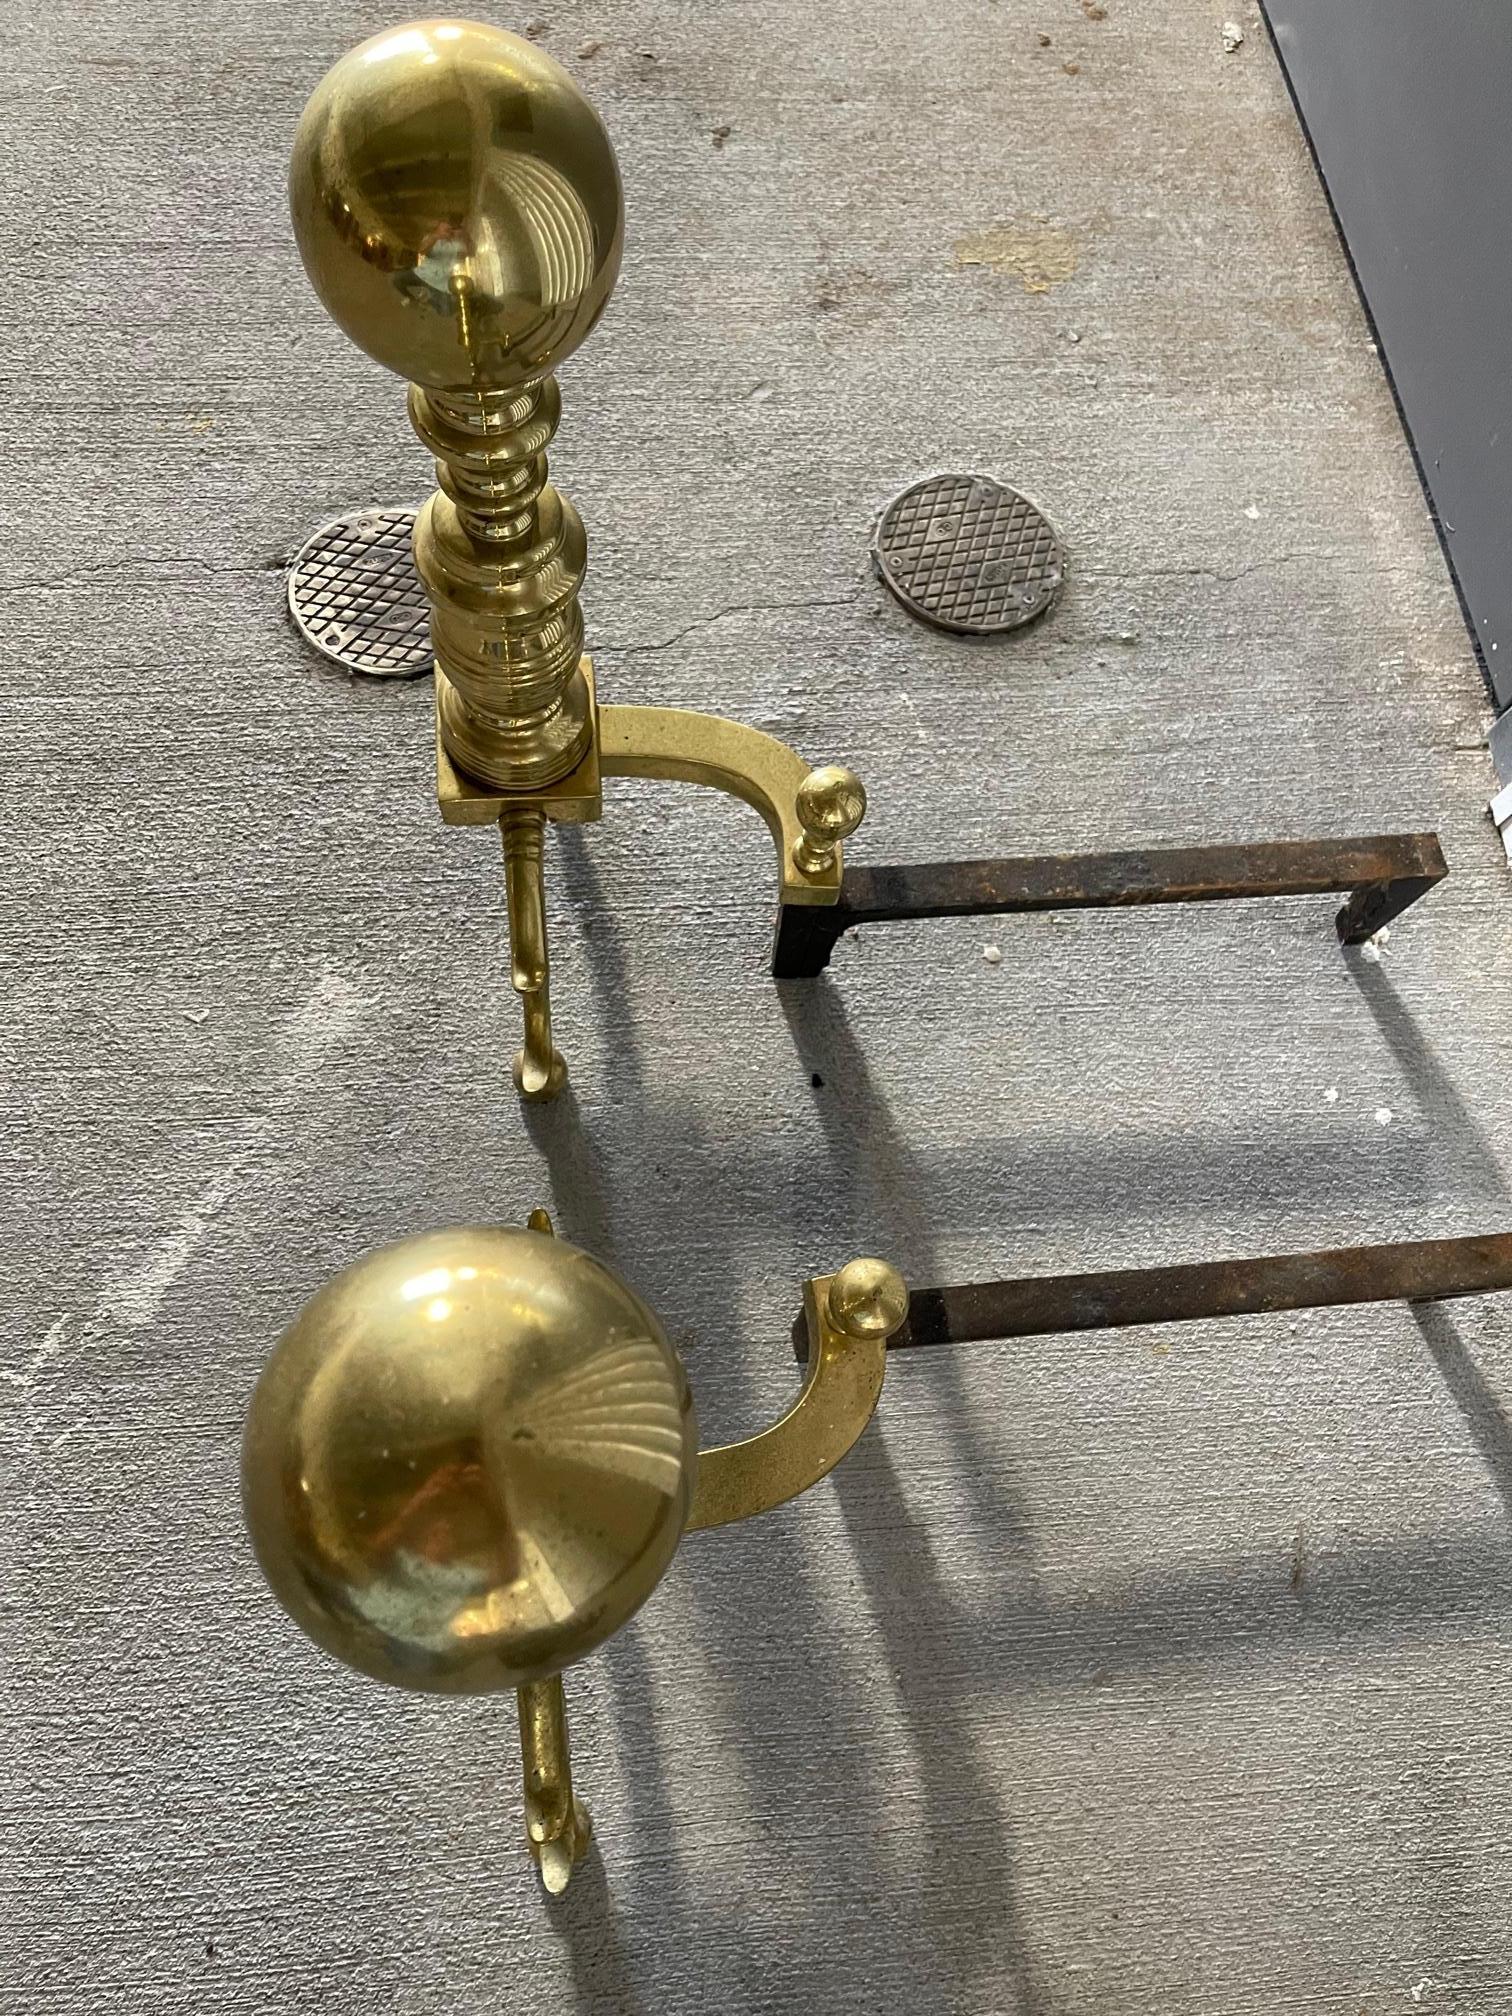 Pair of Brass Andirons with a Decorative Ball at Top and Feet, 19th Century 1